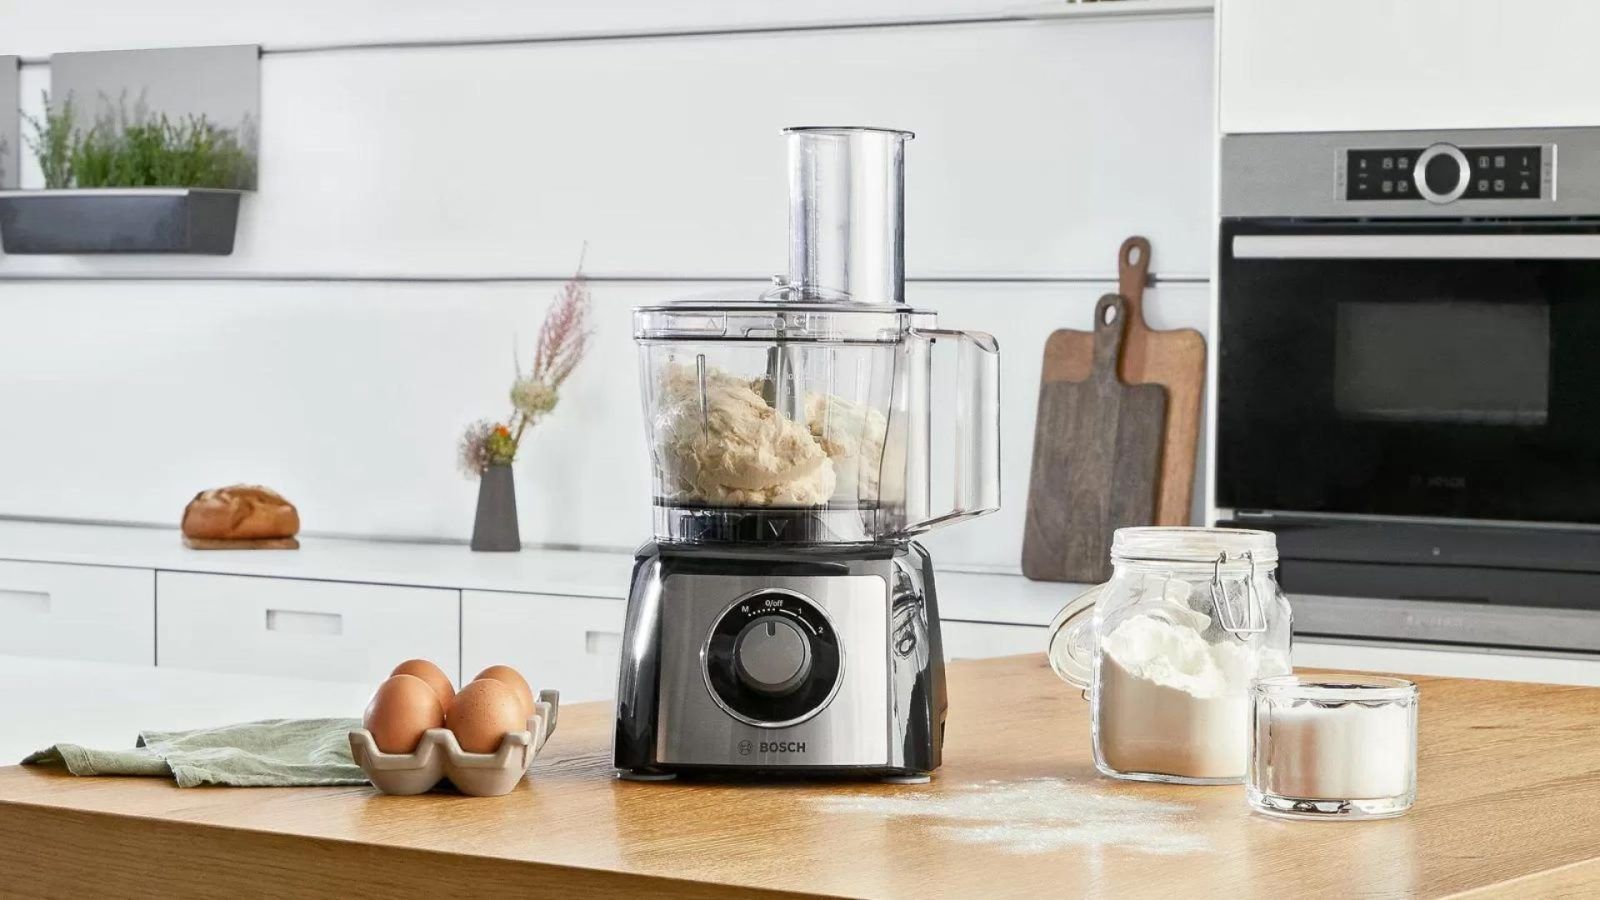 How to Buy a Food Processor - Food Processor Guide